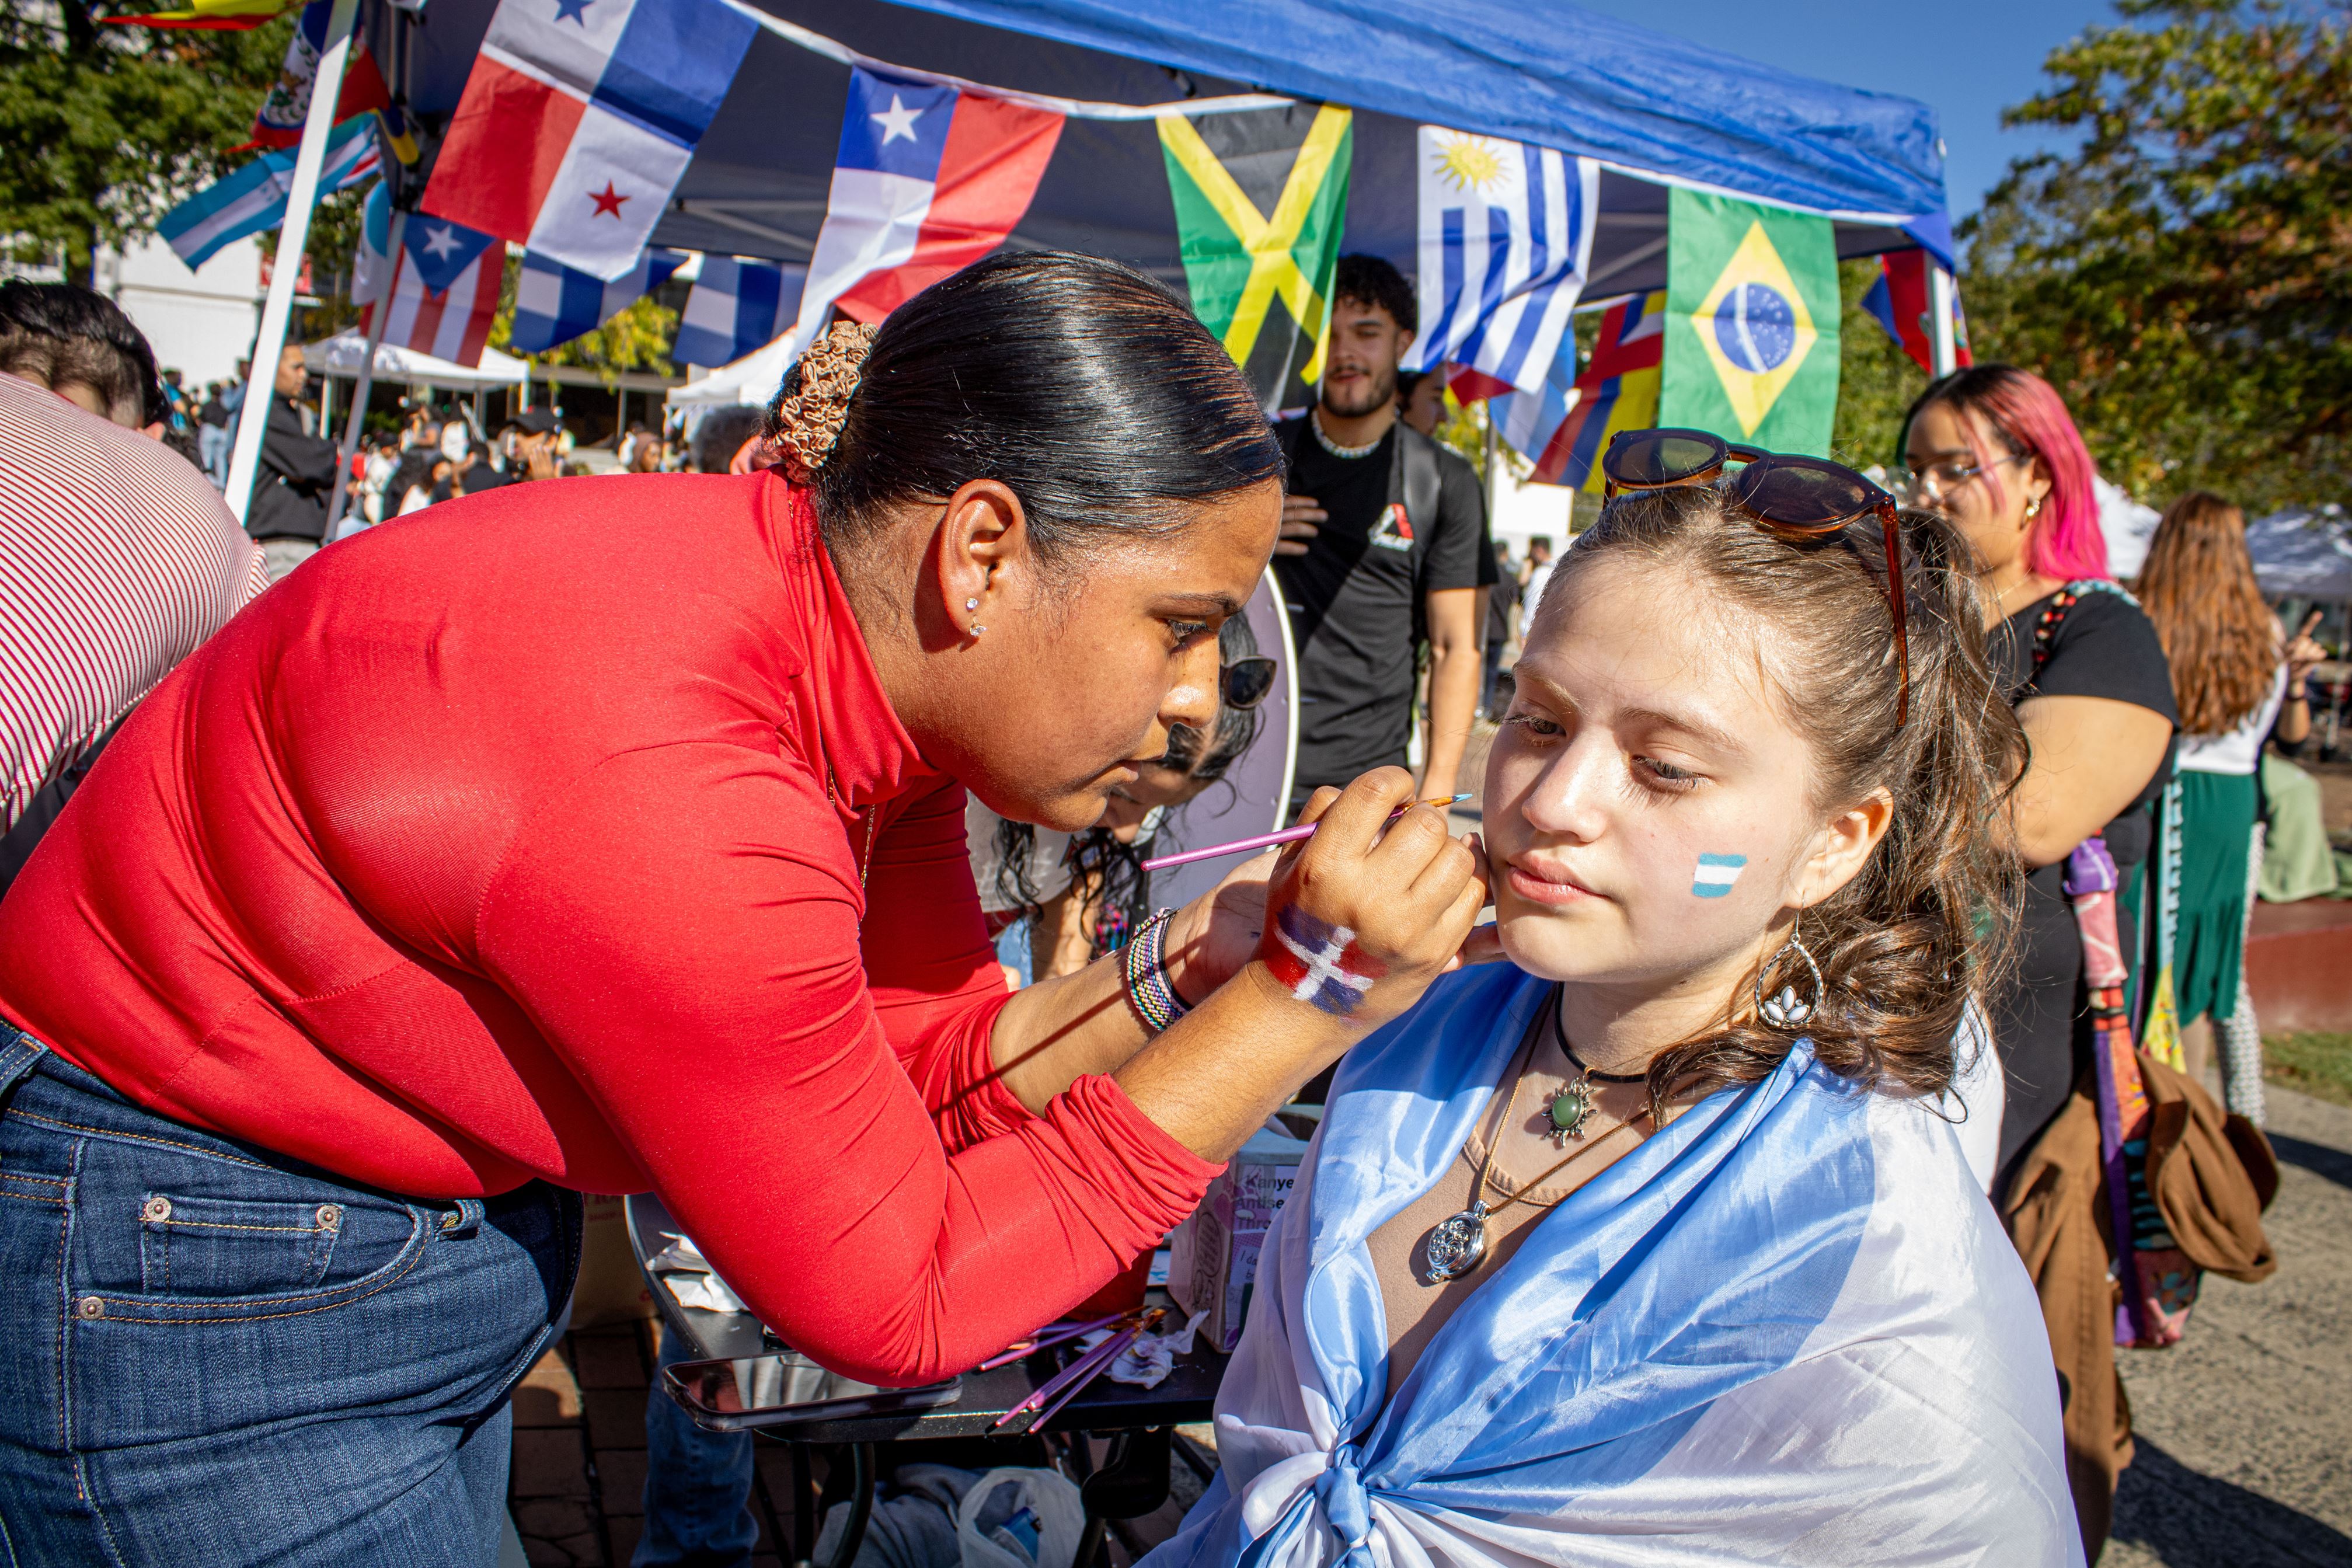 Grace Velazquez, a freshman social media and public relations major having the Argentinian flag painted on her face. Dani Mazariegos | The Montclarion